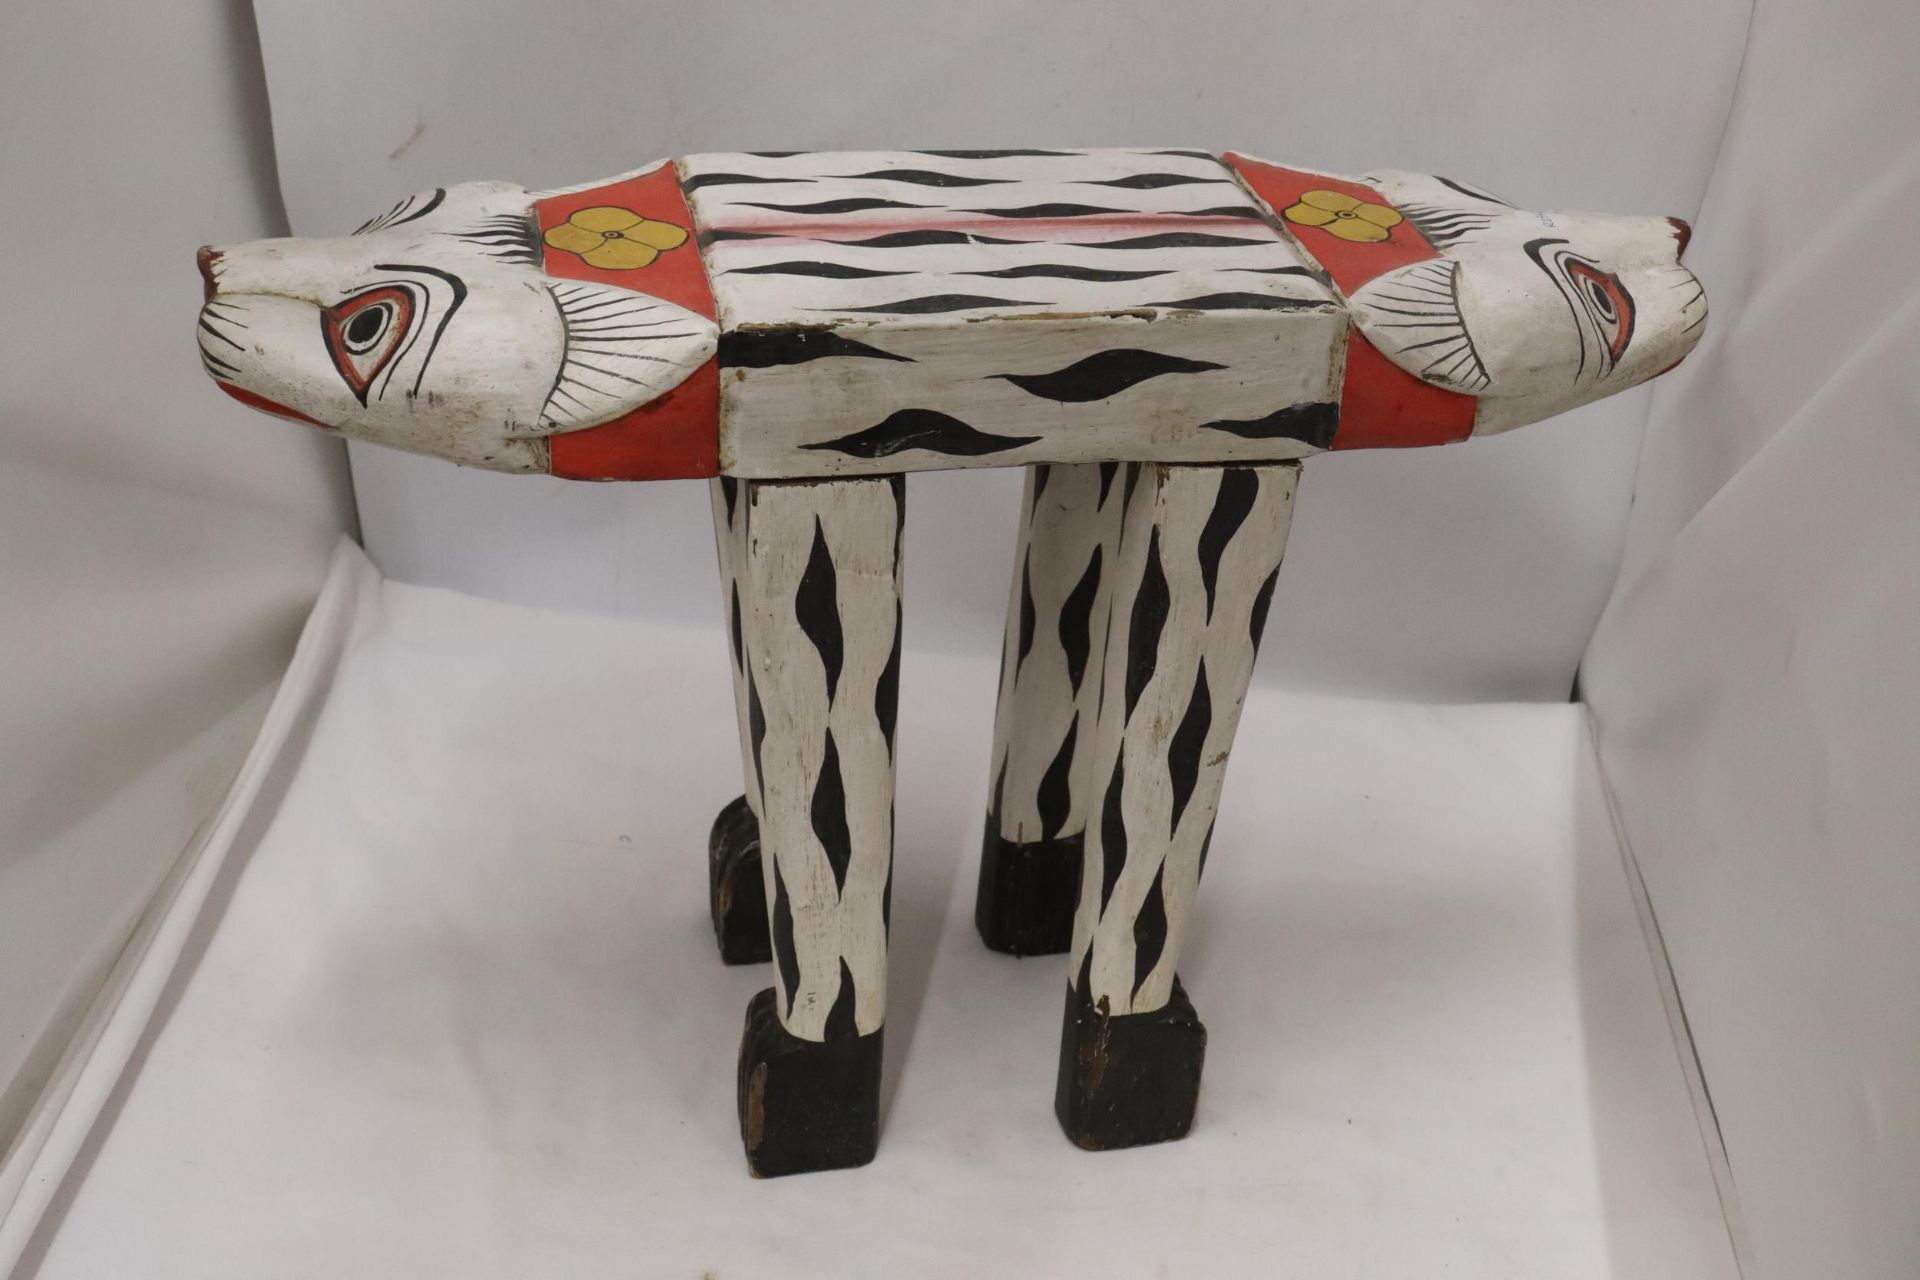 A QUIRKY CHILD'S STOOL IN THE SHAPE OF AN ANIMAL